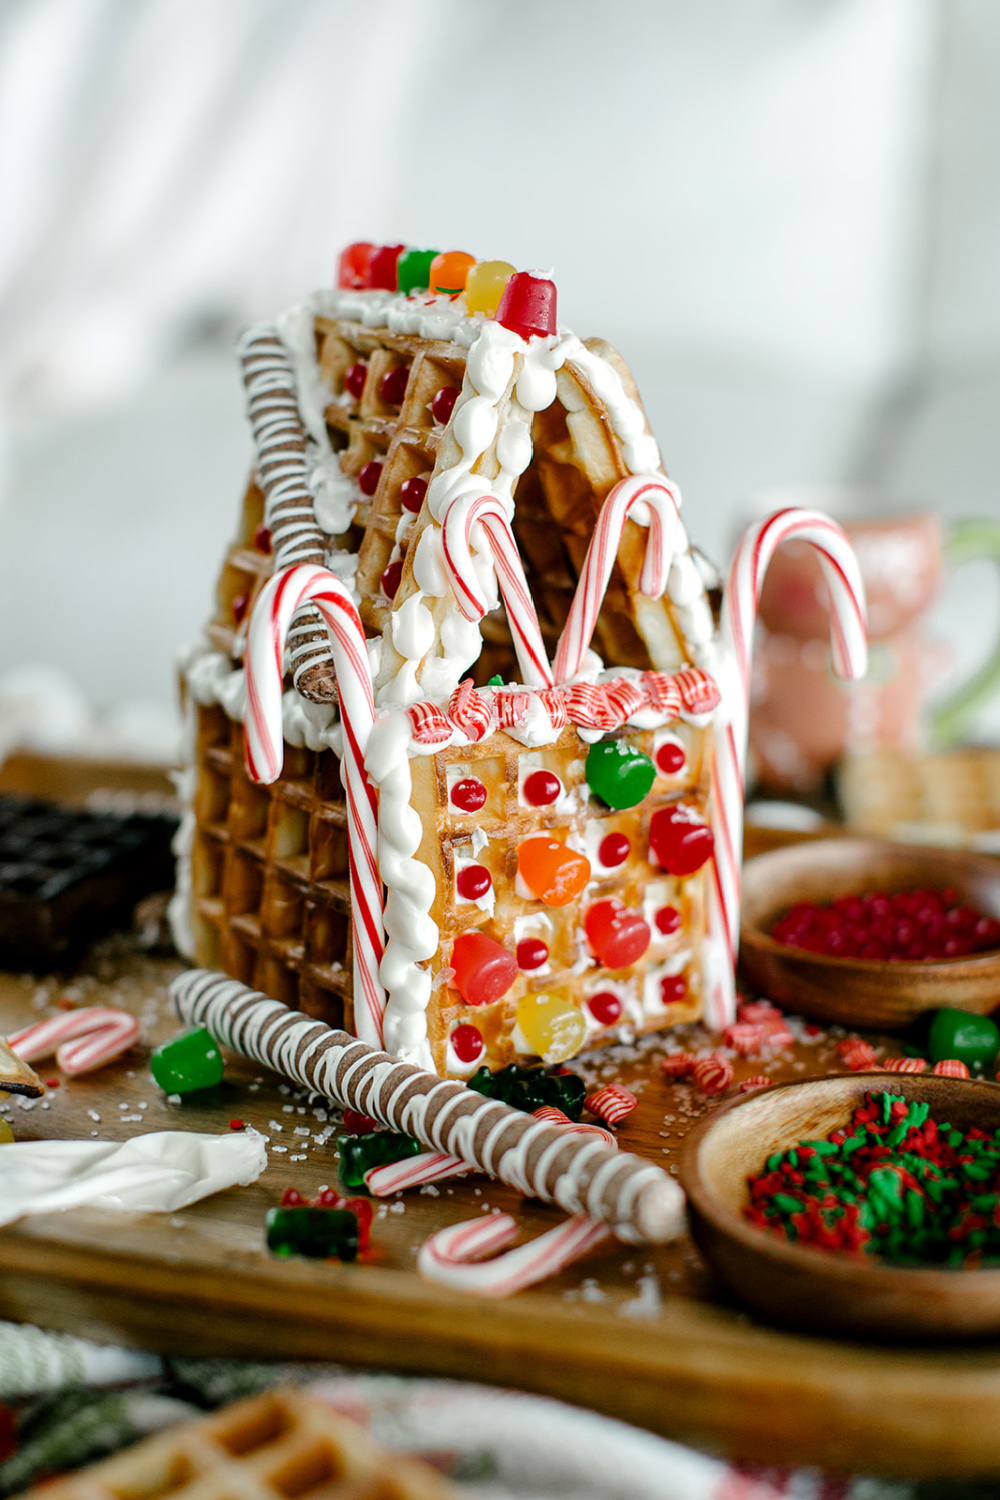 Gingerbread waffle house is fanciful and festive for Christmas - Camille Styles. #wafflehouse #gingerbreadhouses